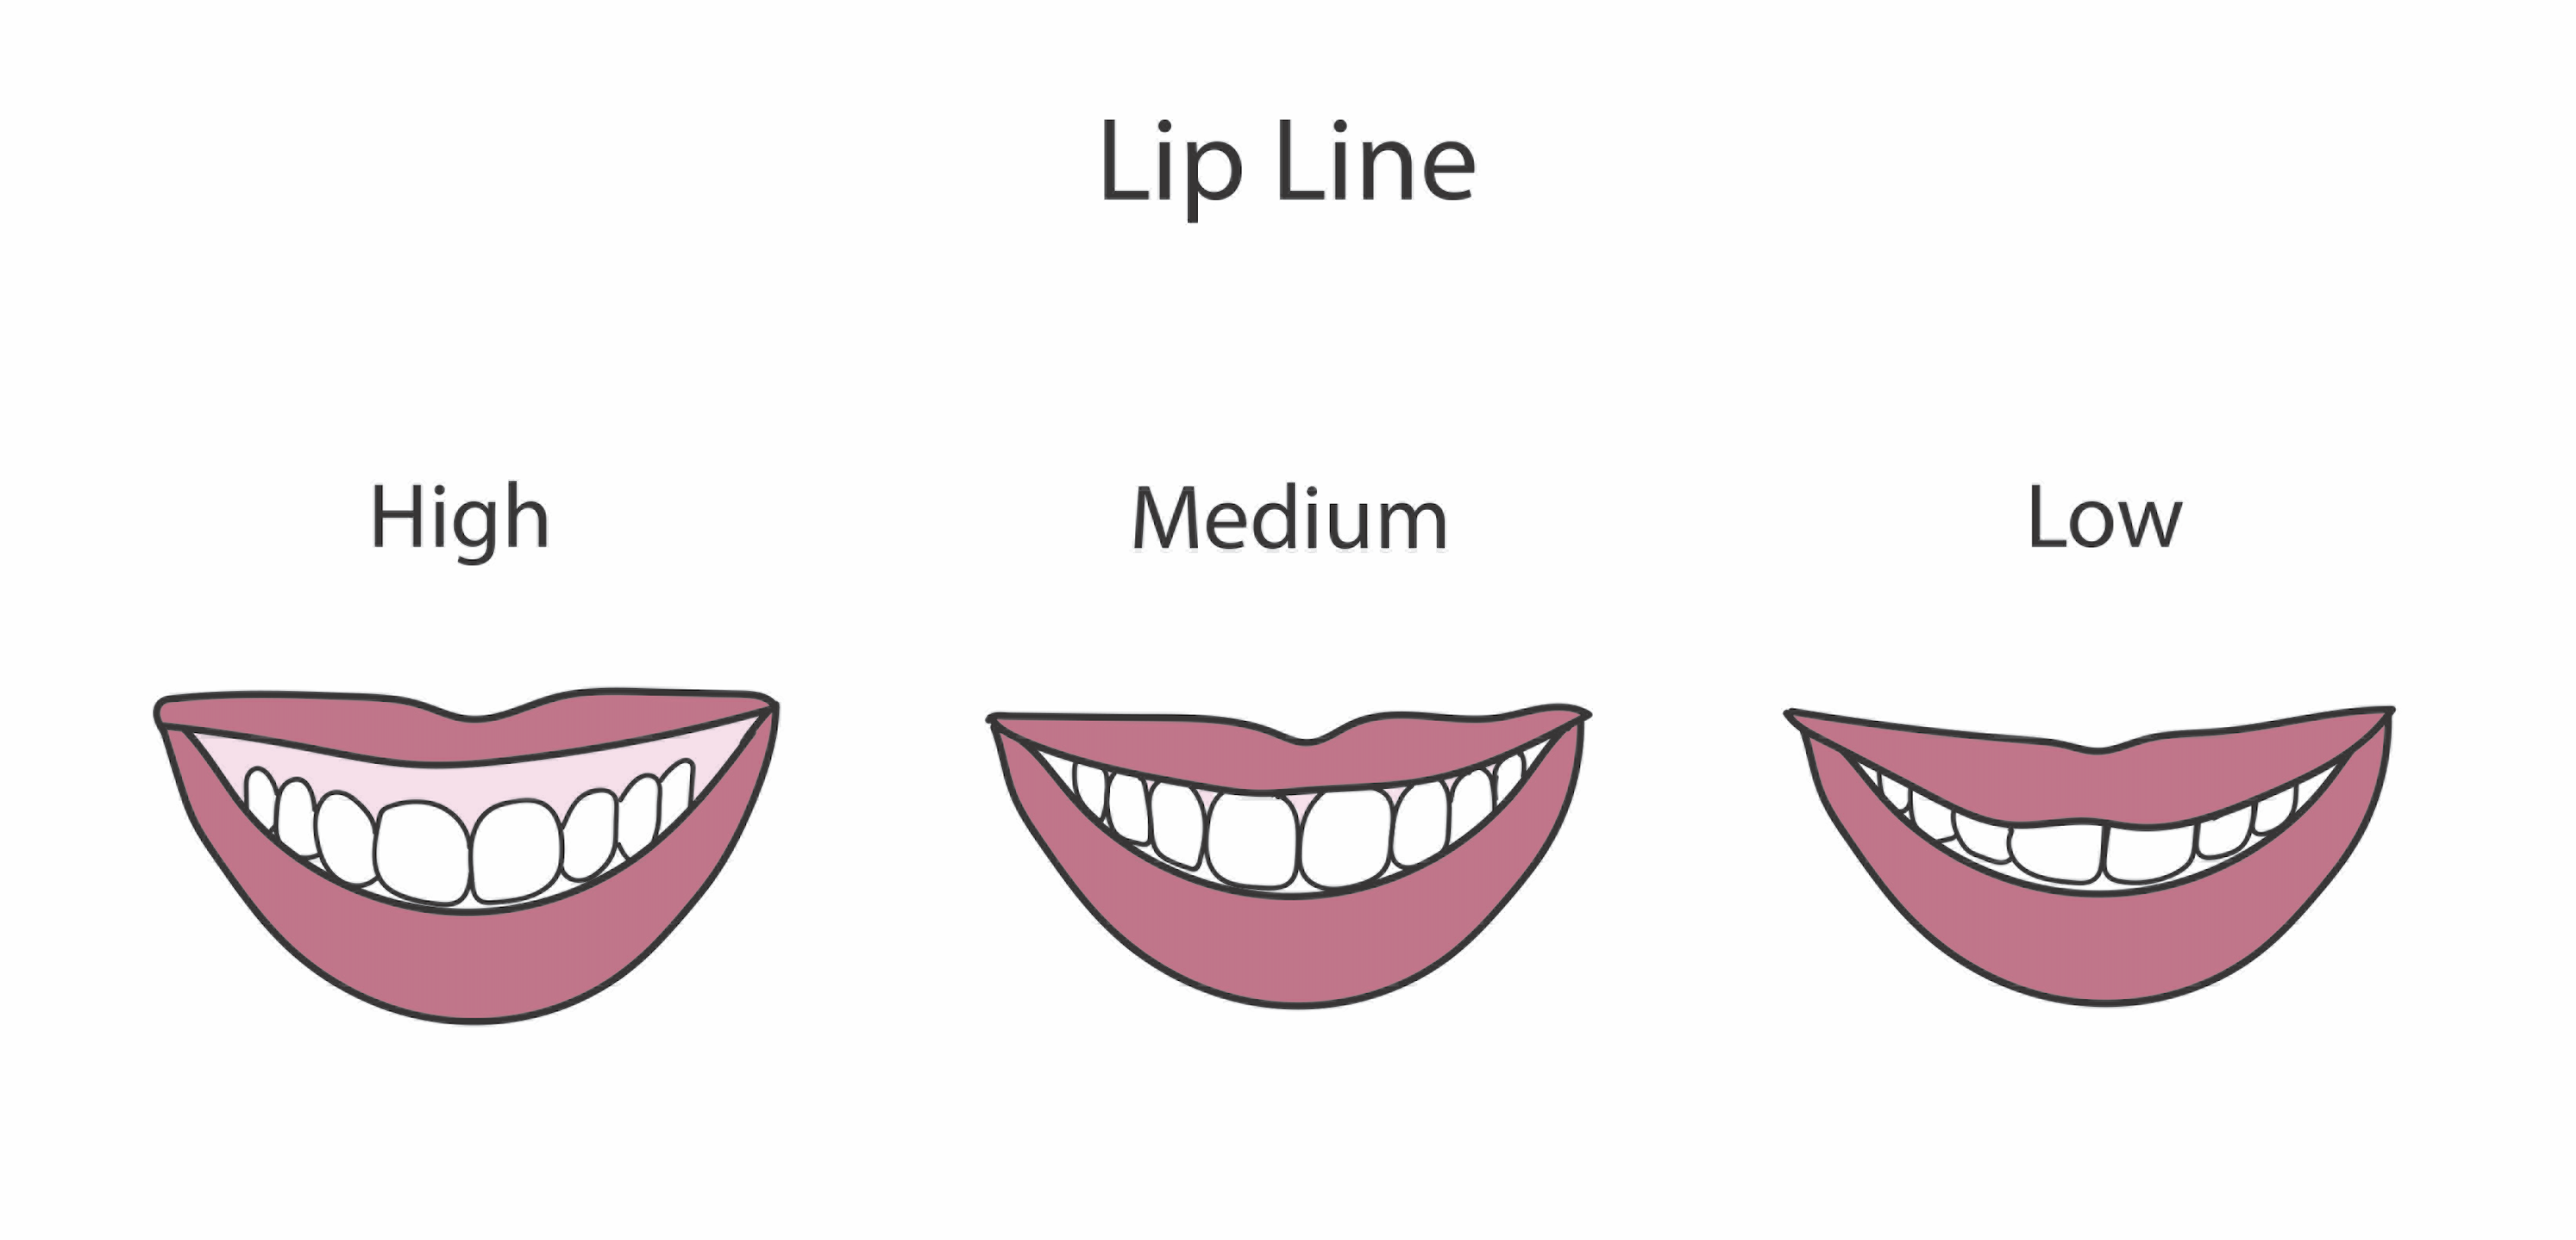 Examples of low, medium, and high lip lines.